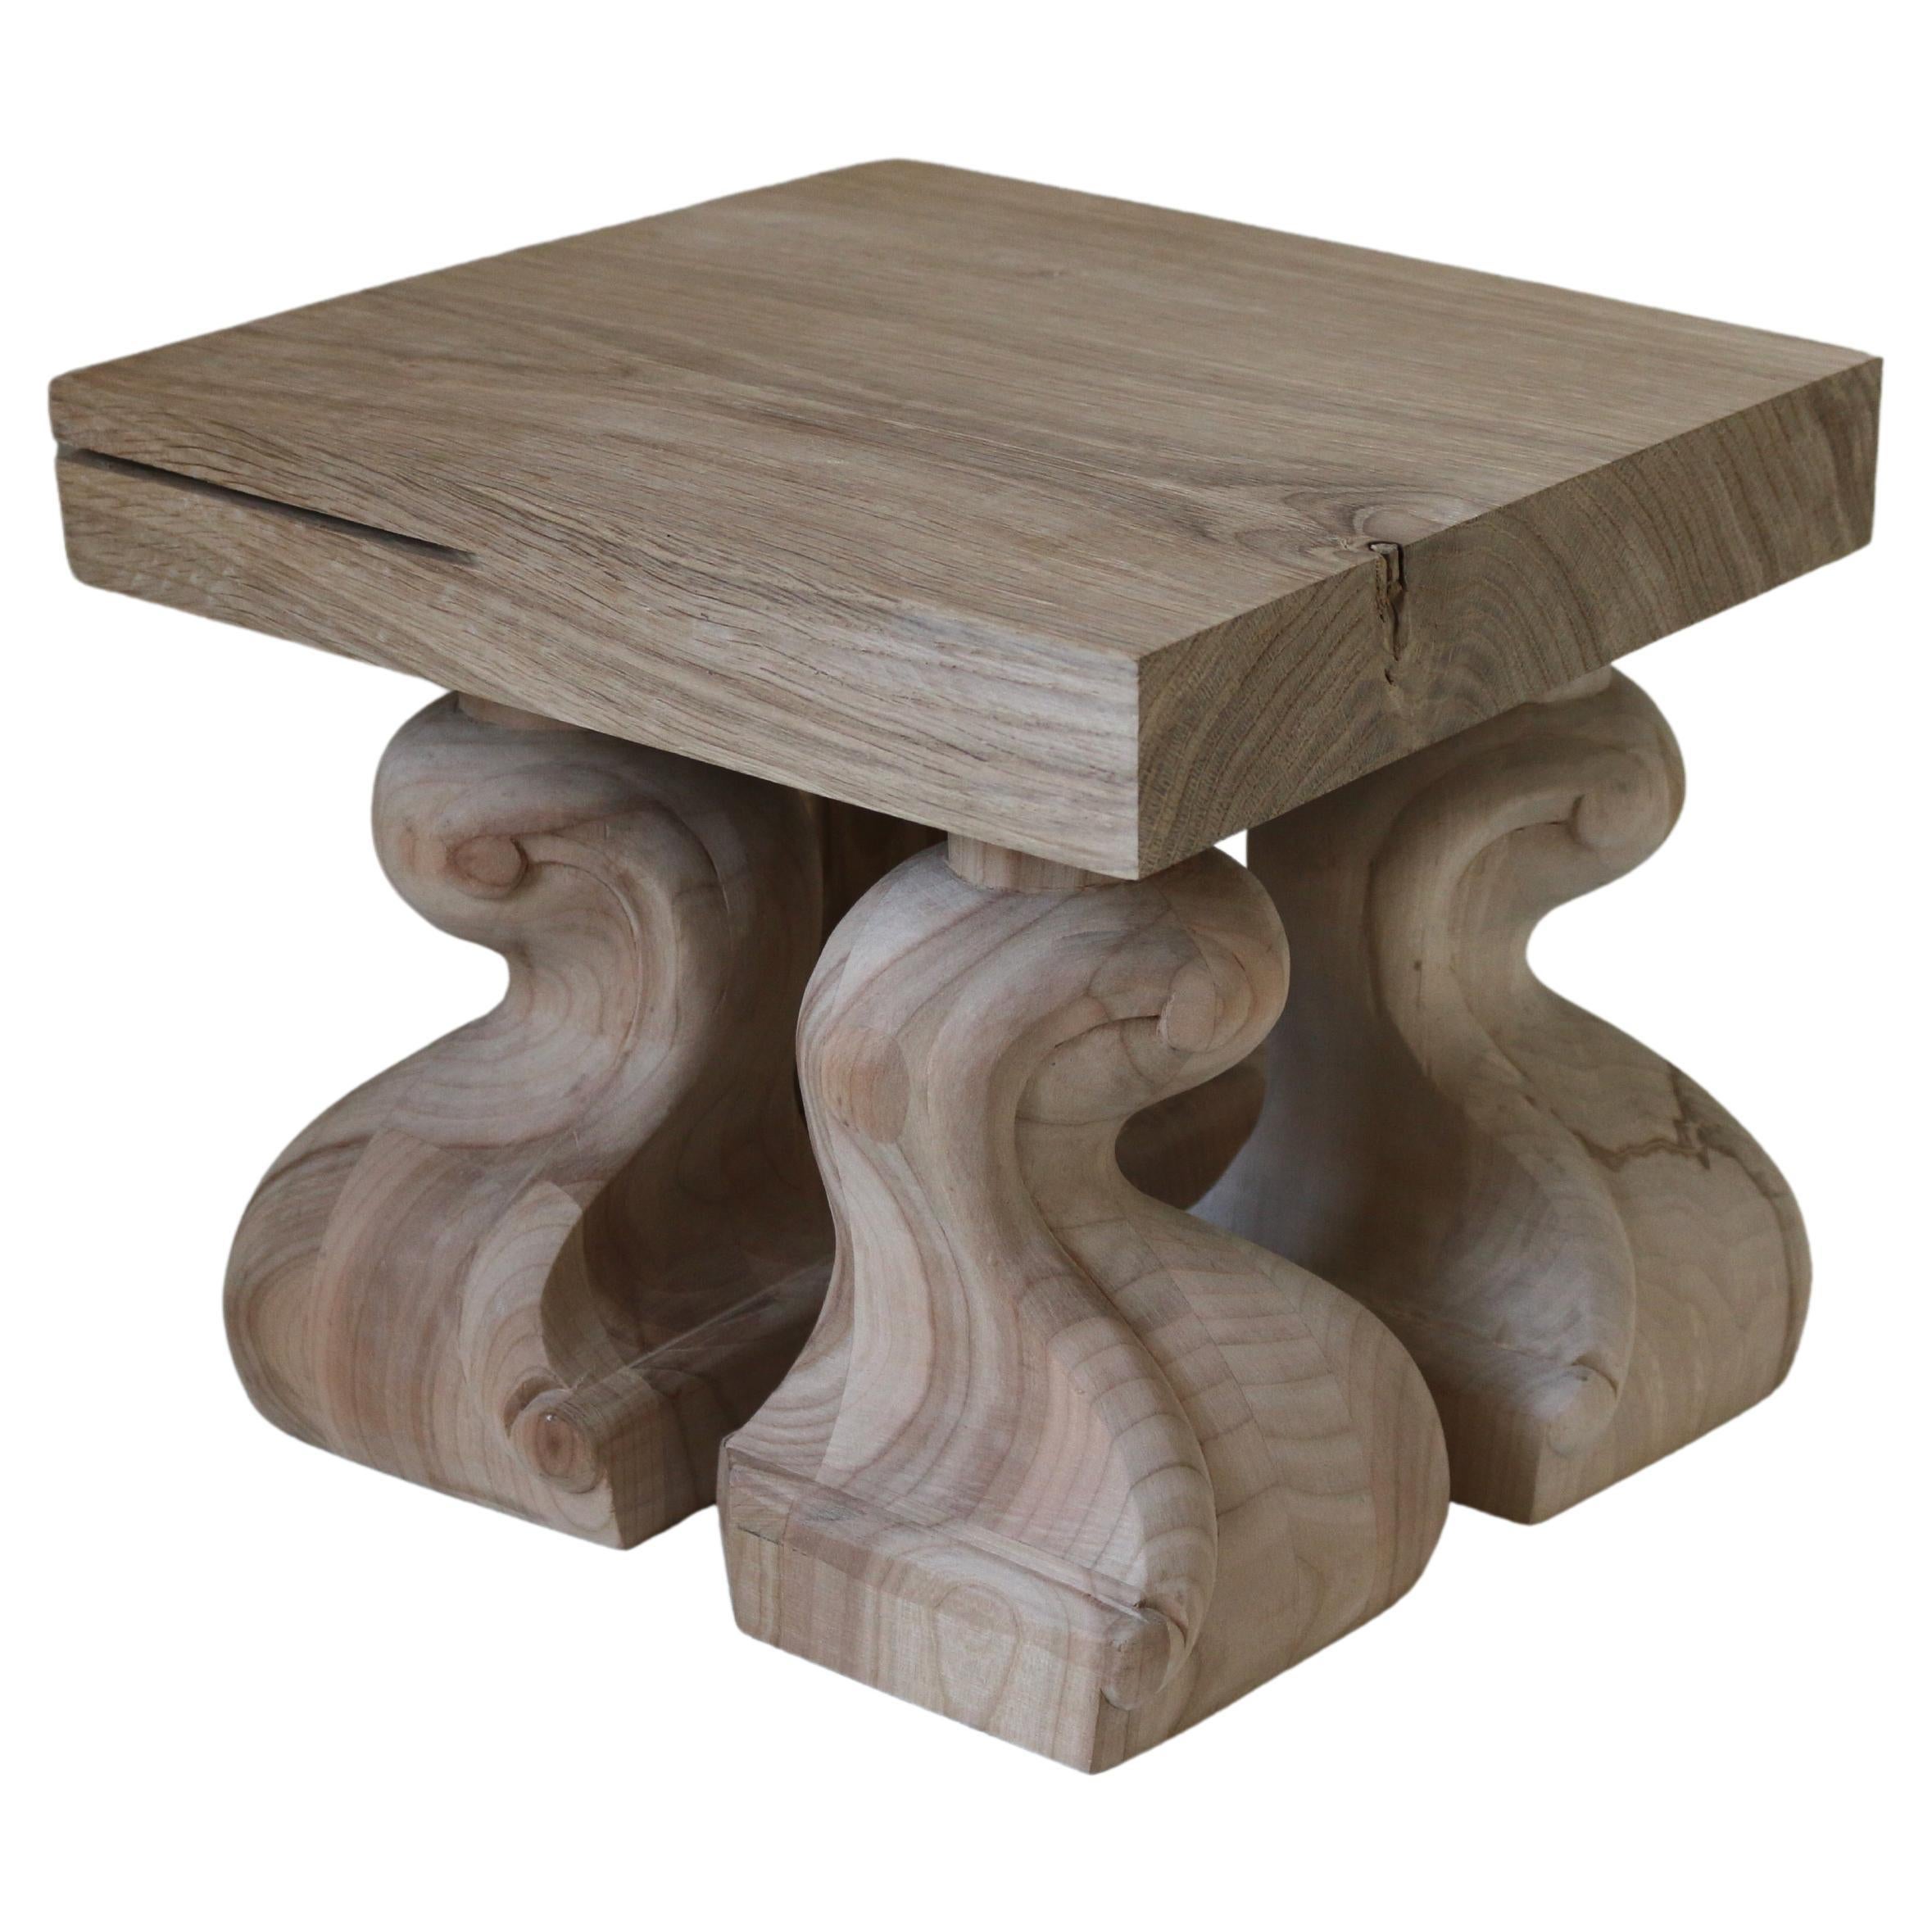 What is a good wood to make a table?